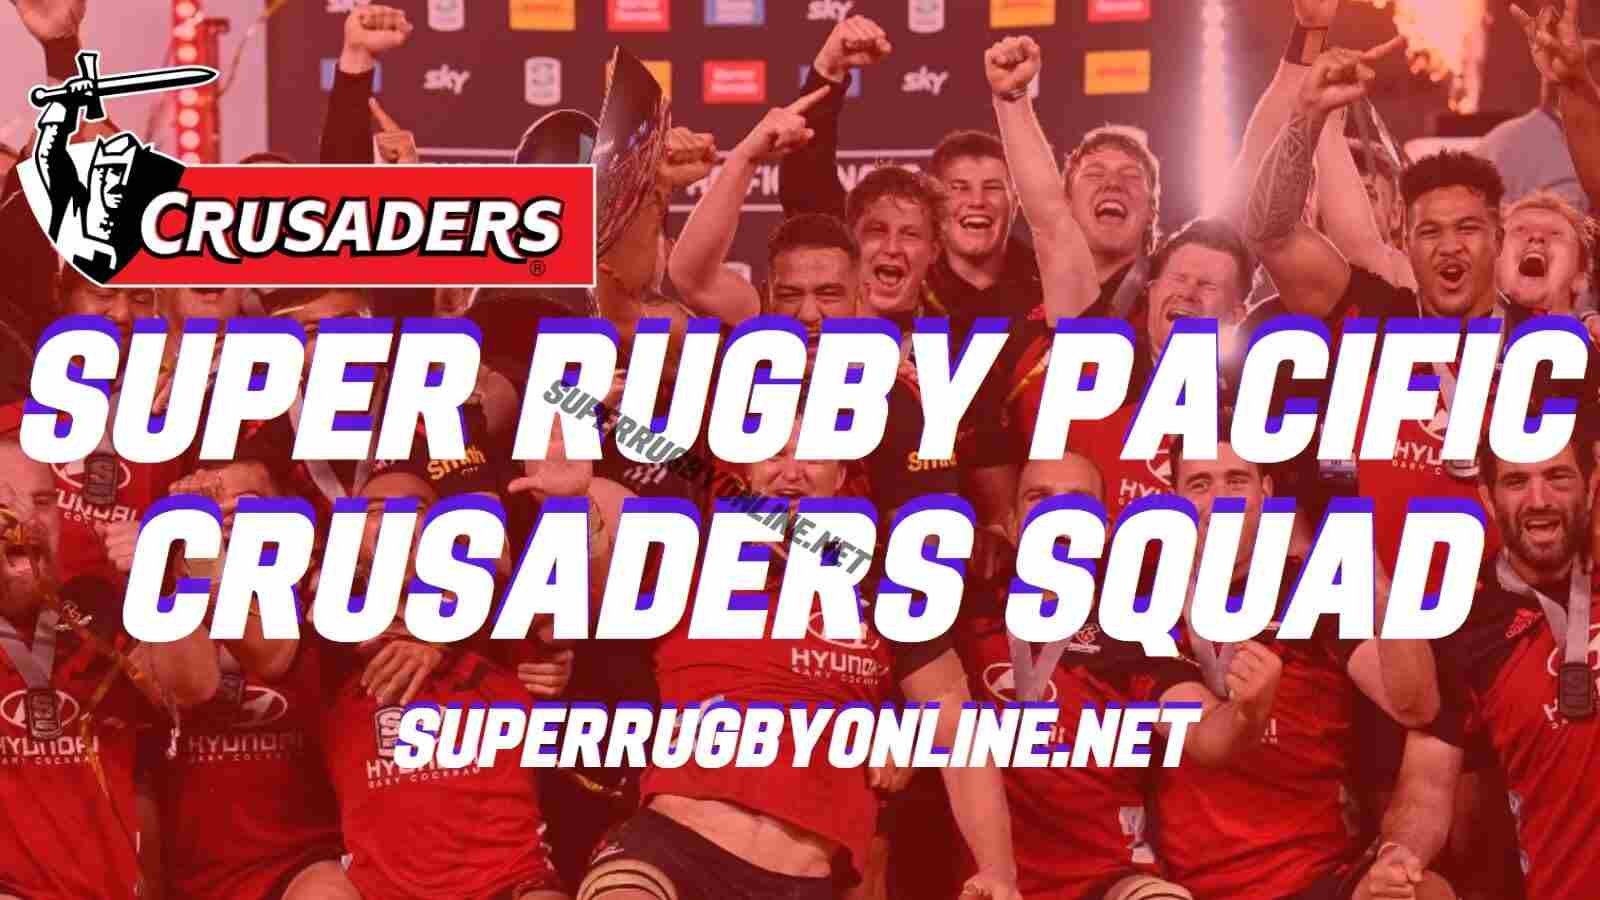 Crusaders Super Rugby Squad Announce